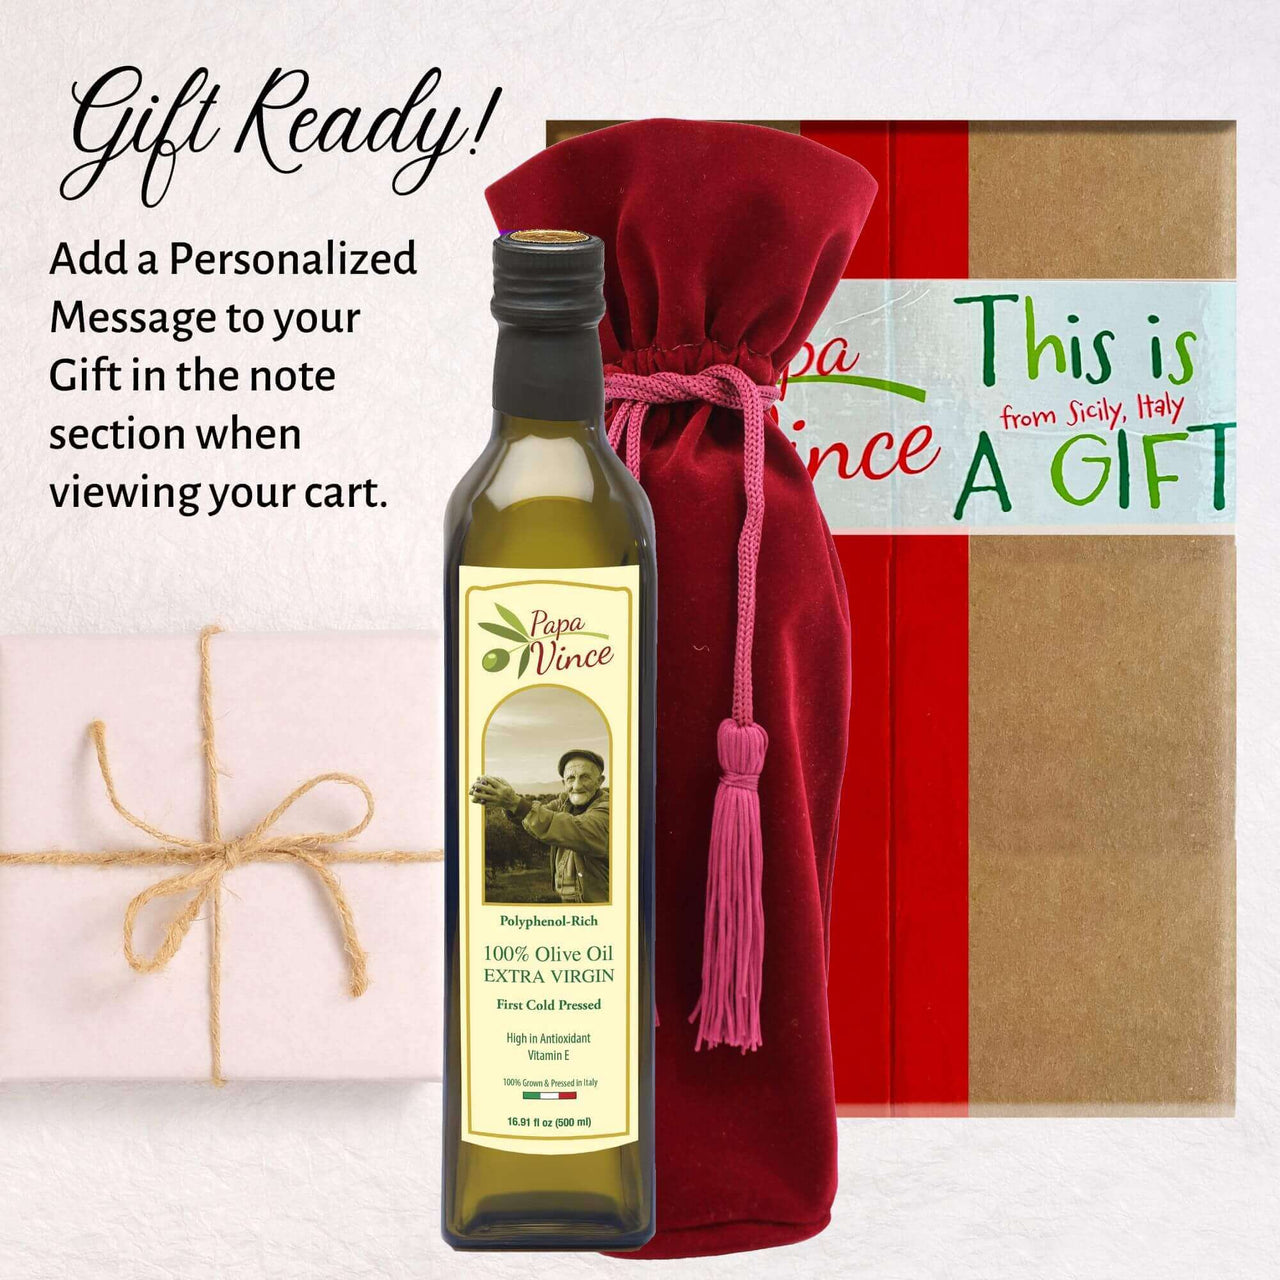 Papa Vince Olive Oil Extra Virgin Gift - Unblended, Family Harvest 2022/23, High in Polyphenols, Single Estate, First Cold Pressed, Sicily, Italy, Peppery Finish, Unfiltered, Unrefined, Velvet Burgundy - Papa Vince